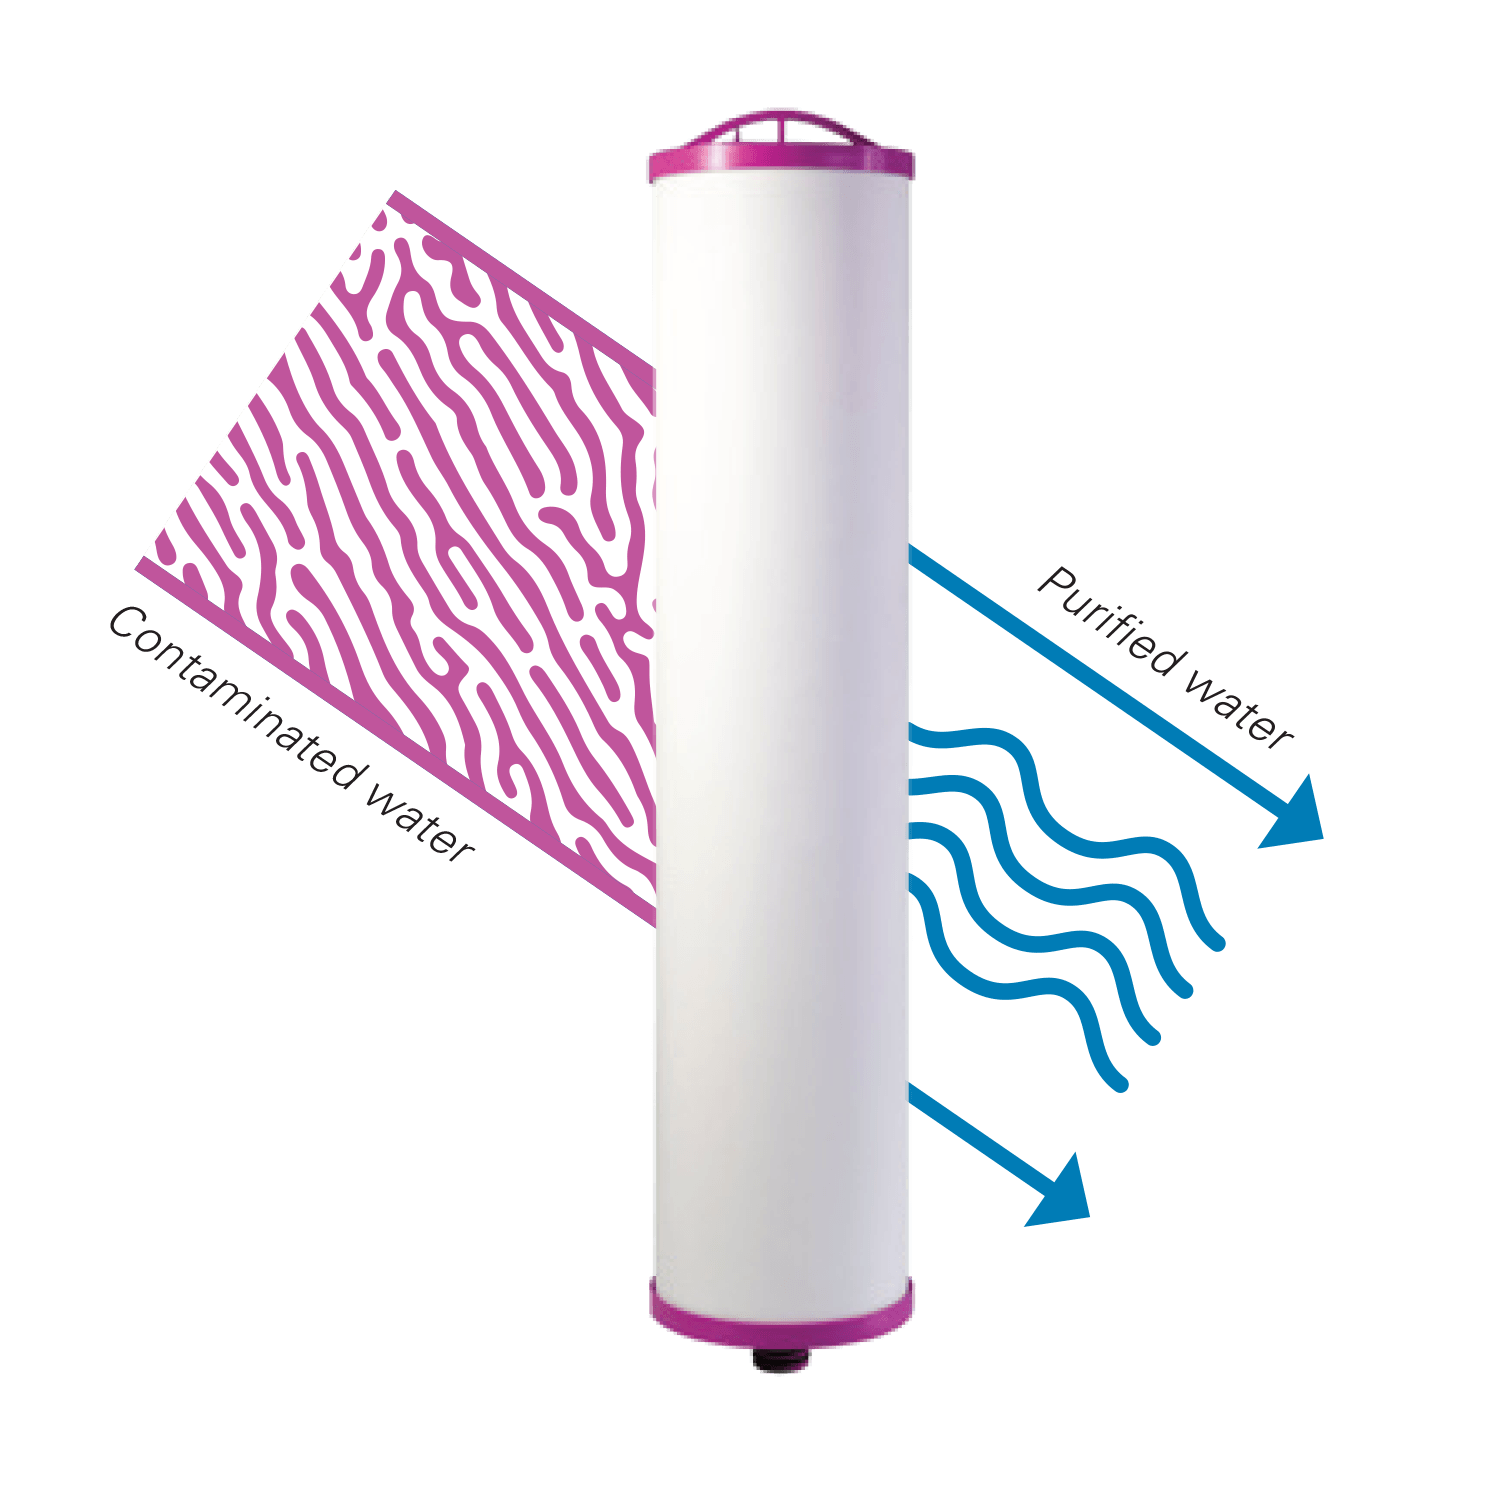 Atomos Filter - For removal of ARSENIC III and V - Tradewinds Water Filtration